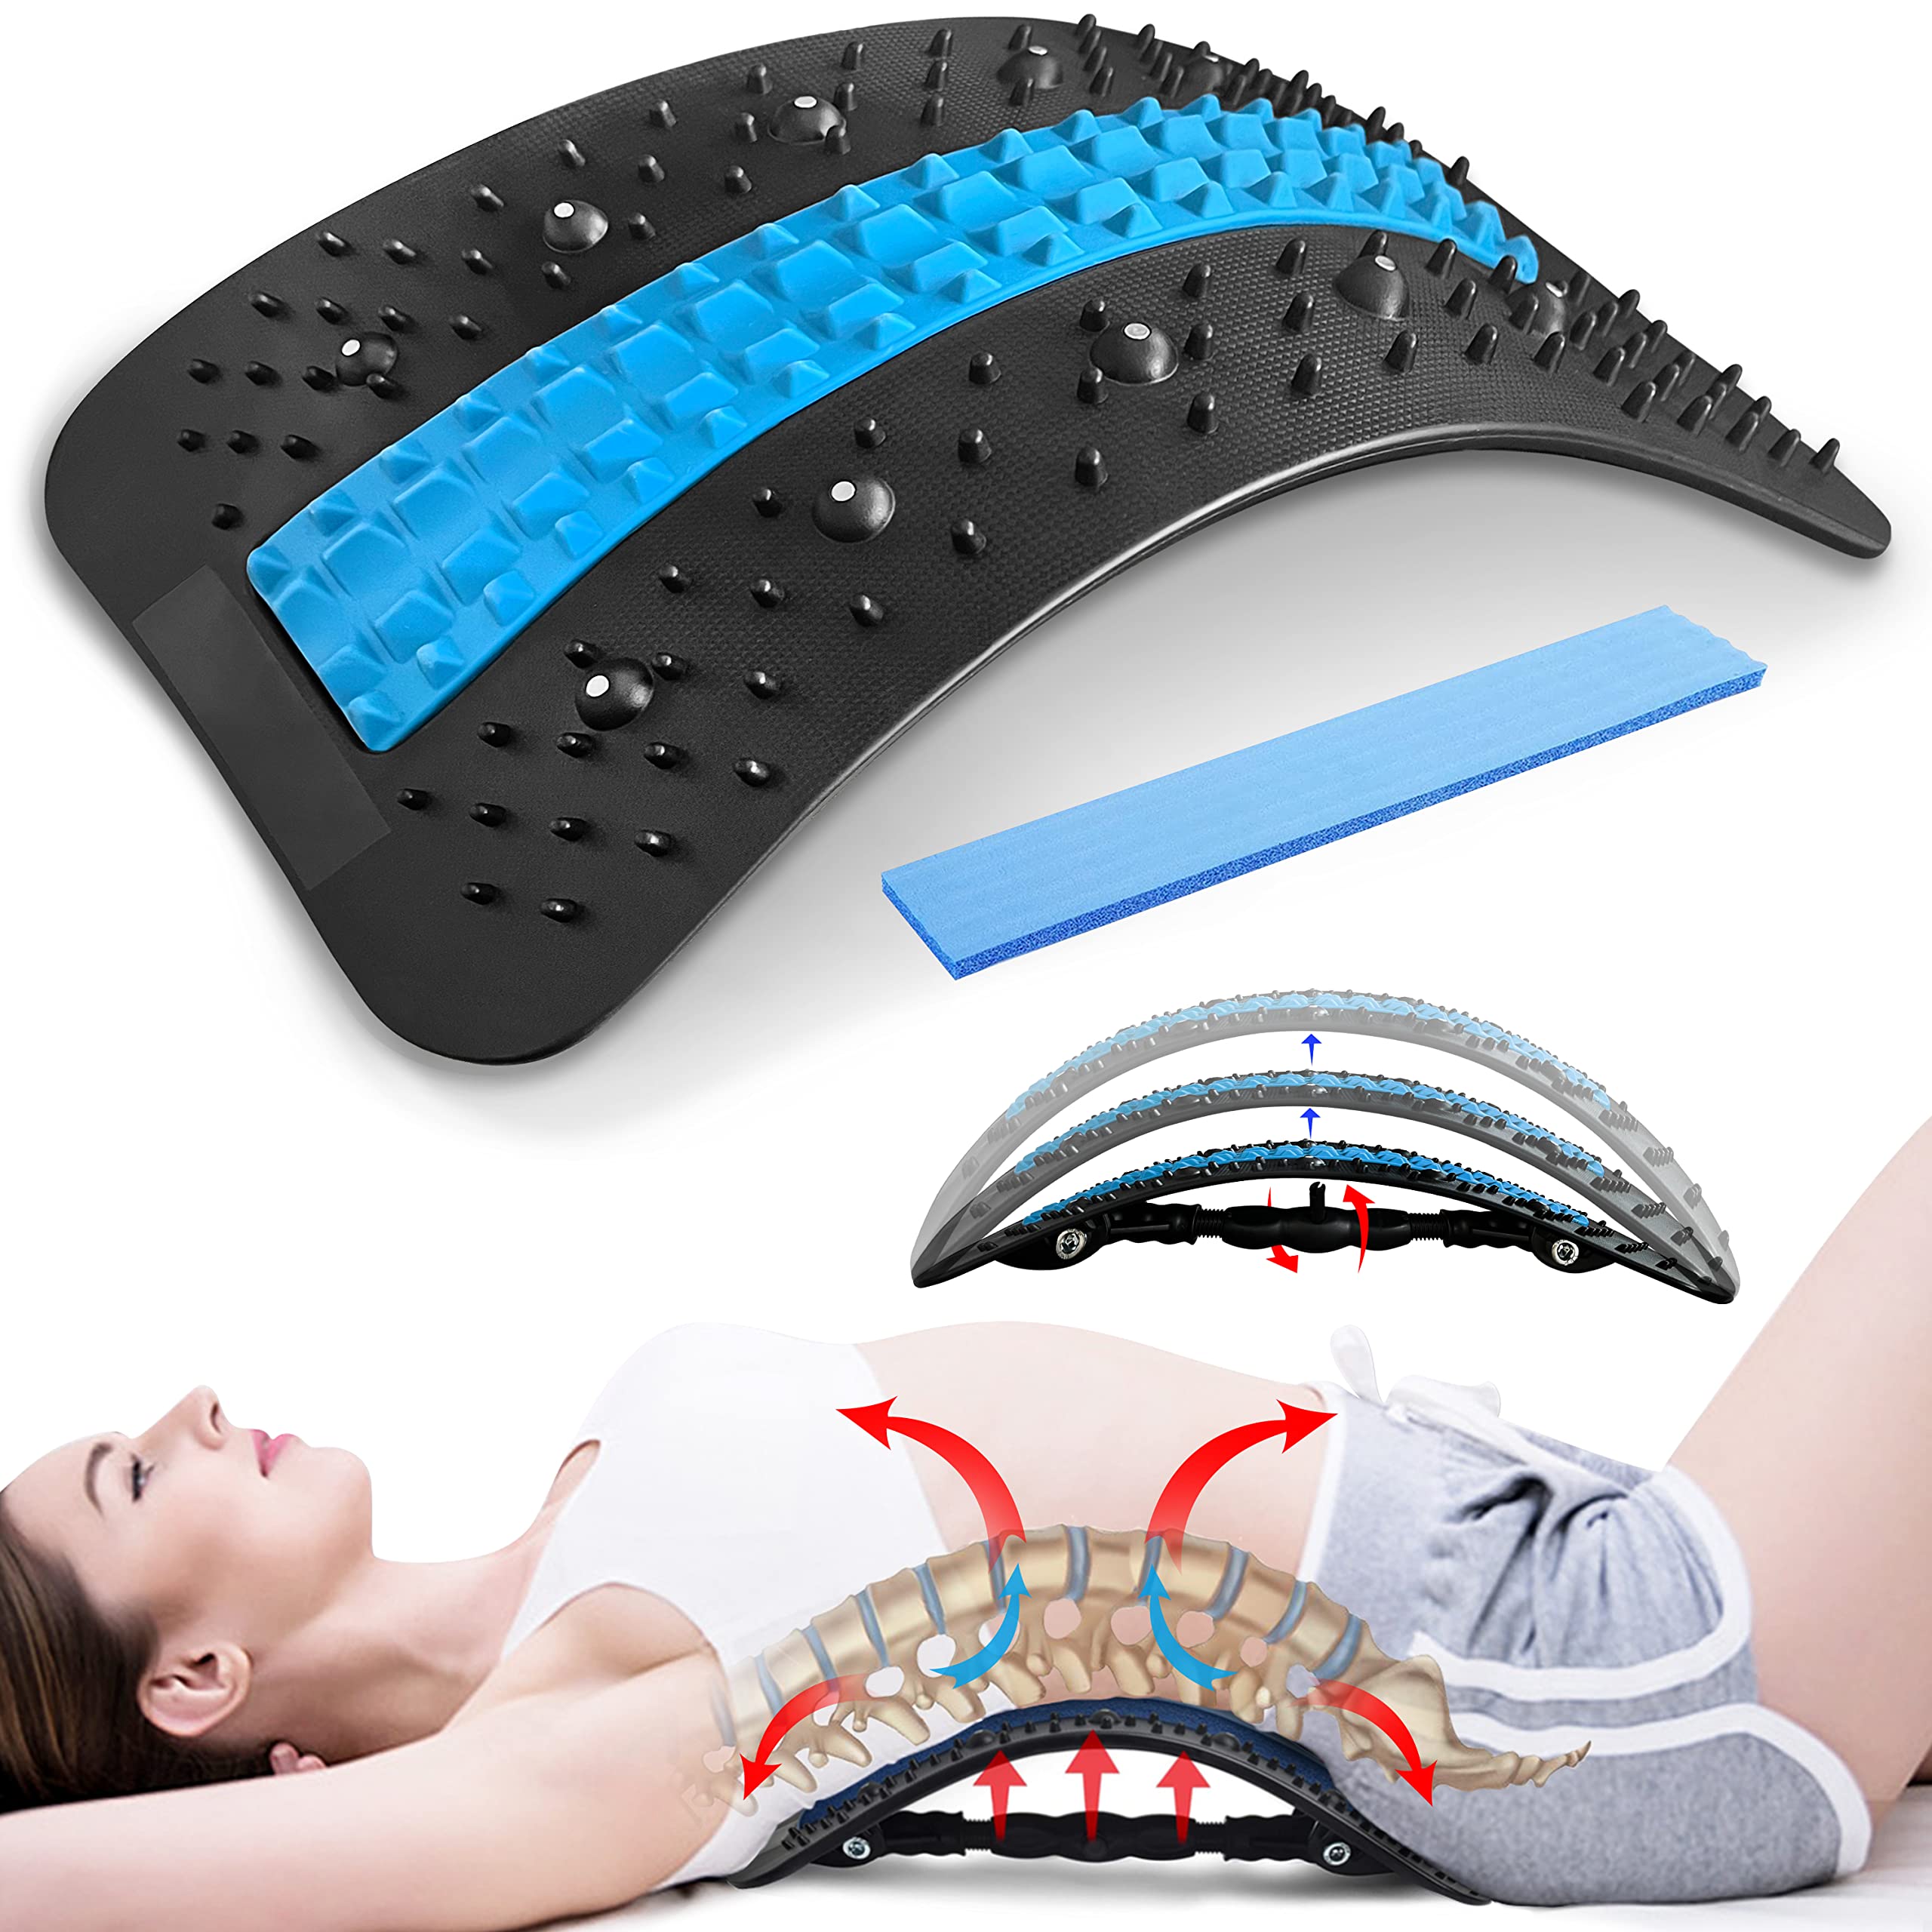 Back Stretcher Pillow For Back Pain Relief,Lumbar Support,Herniated Disc,Sciatic